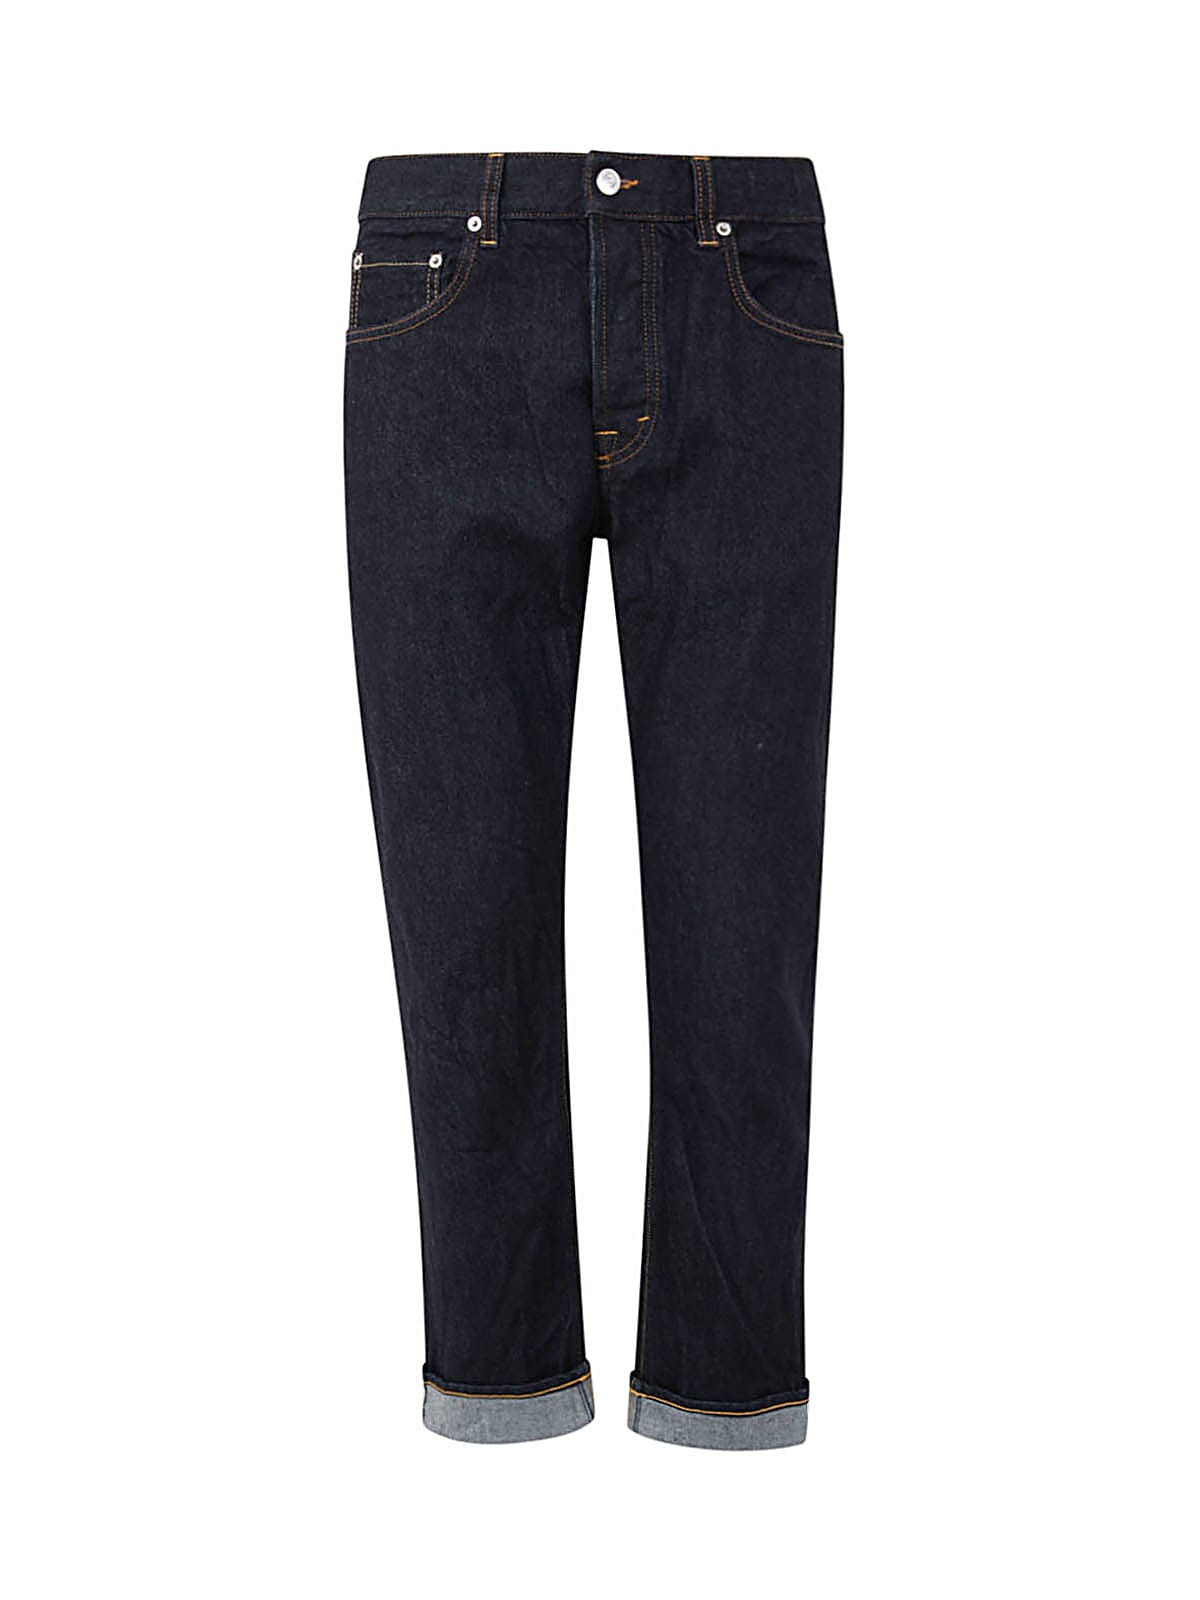 Department Five Keith Five Pockets Trouser Slim